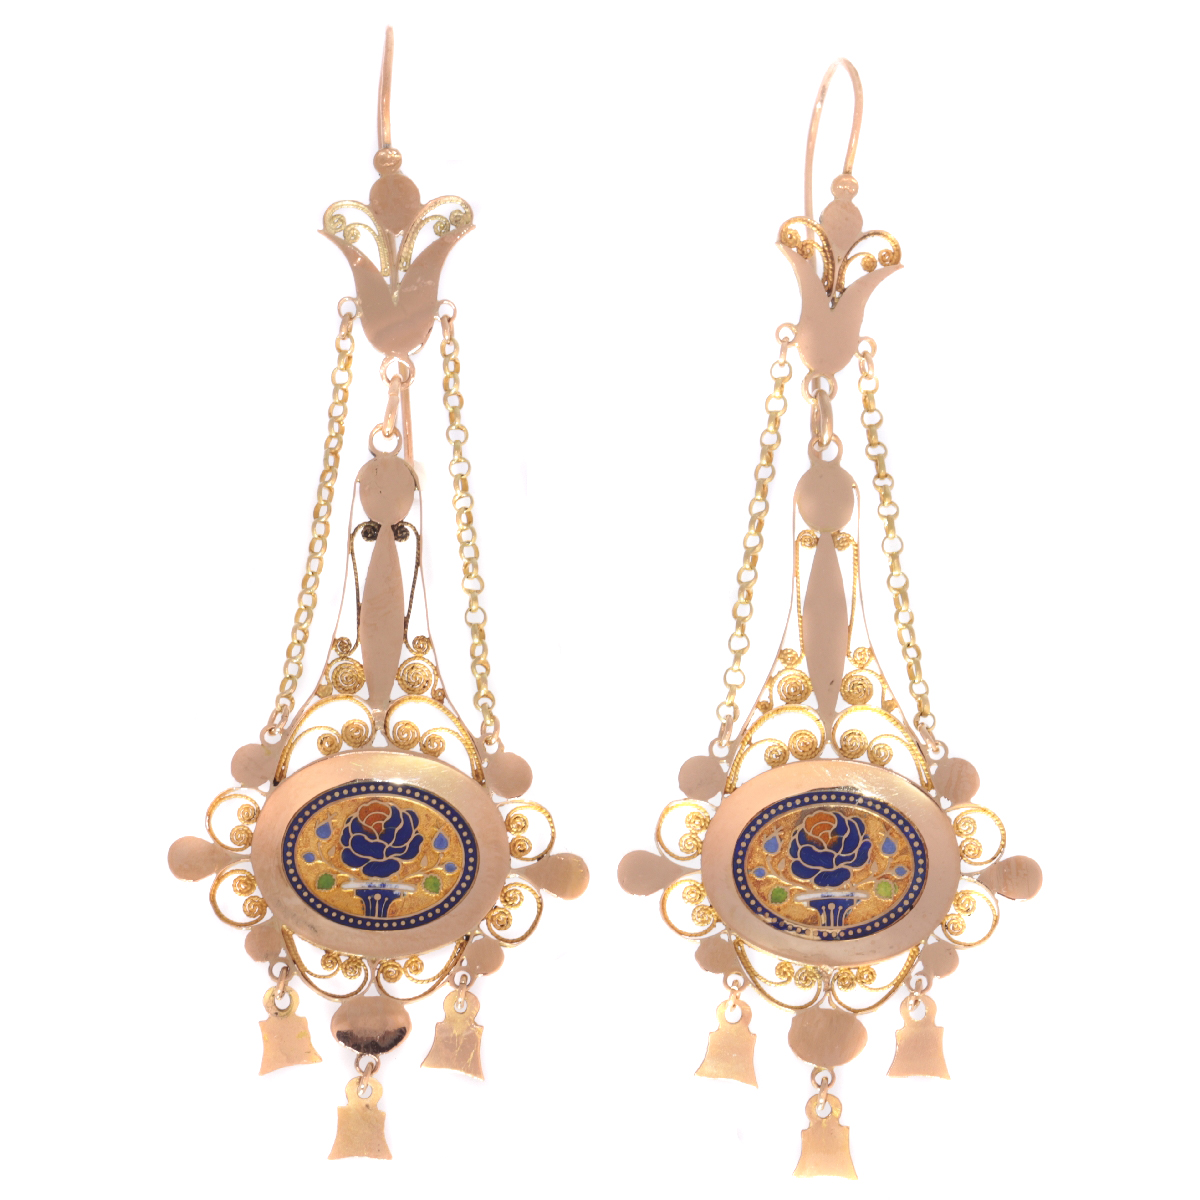 Antique gold pendent earrings with filigree and enamel early 19th Century